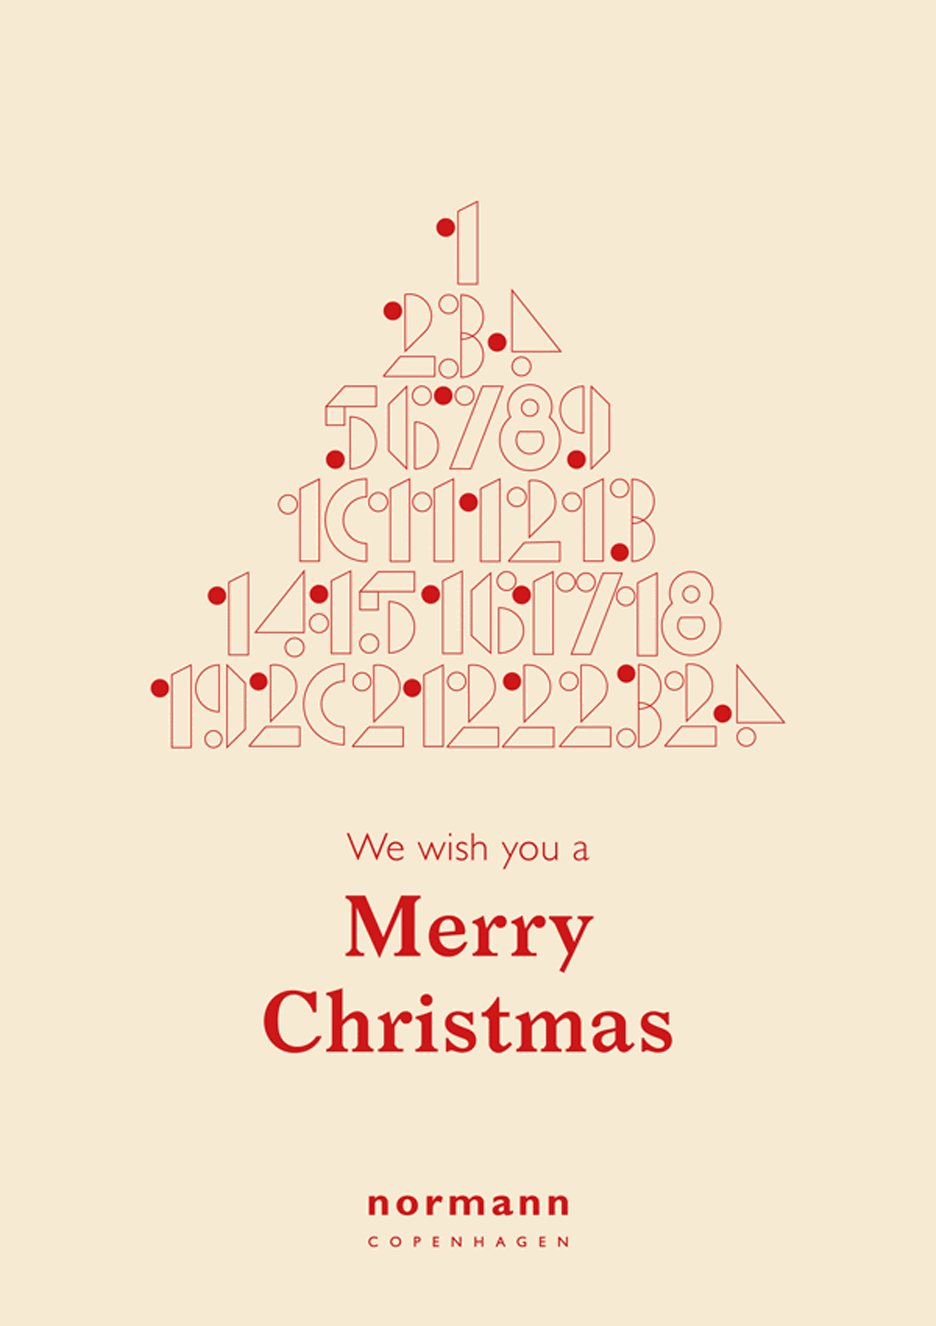 Christmas cards by architects and designers for 2019